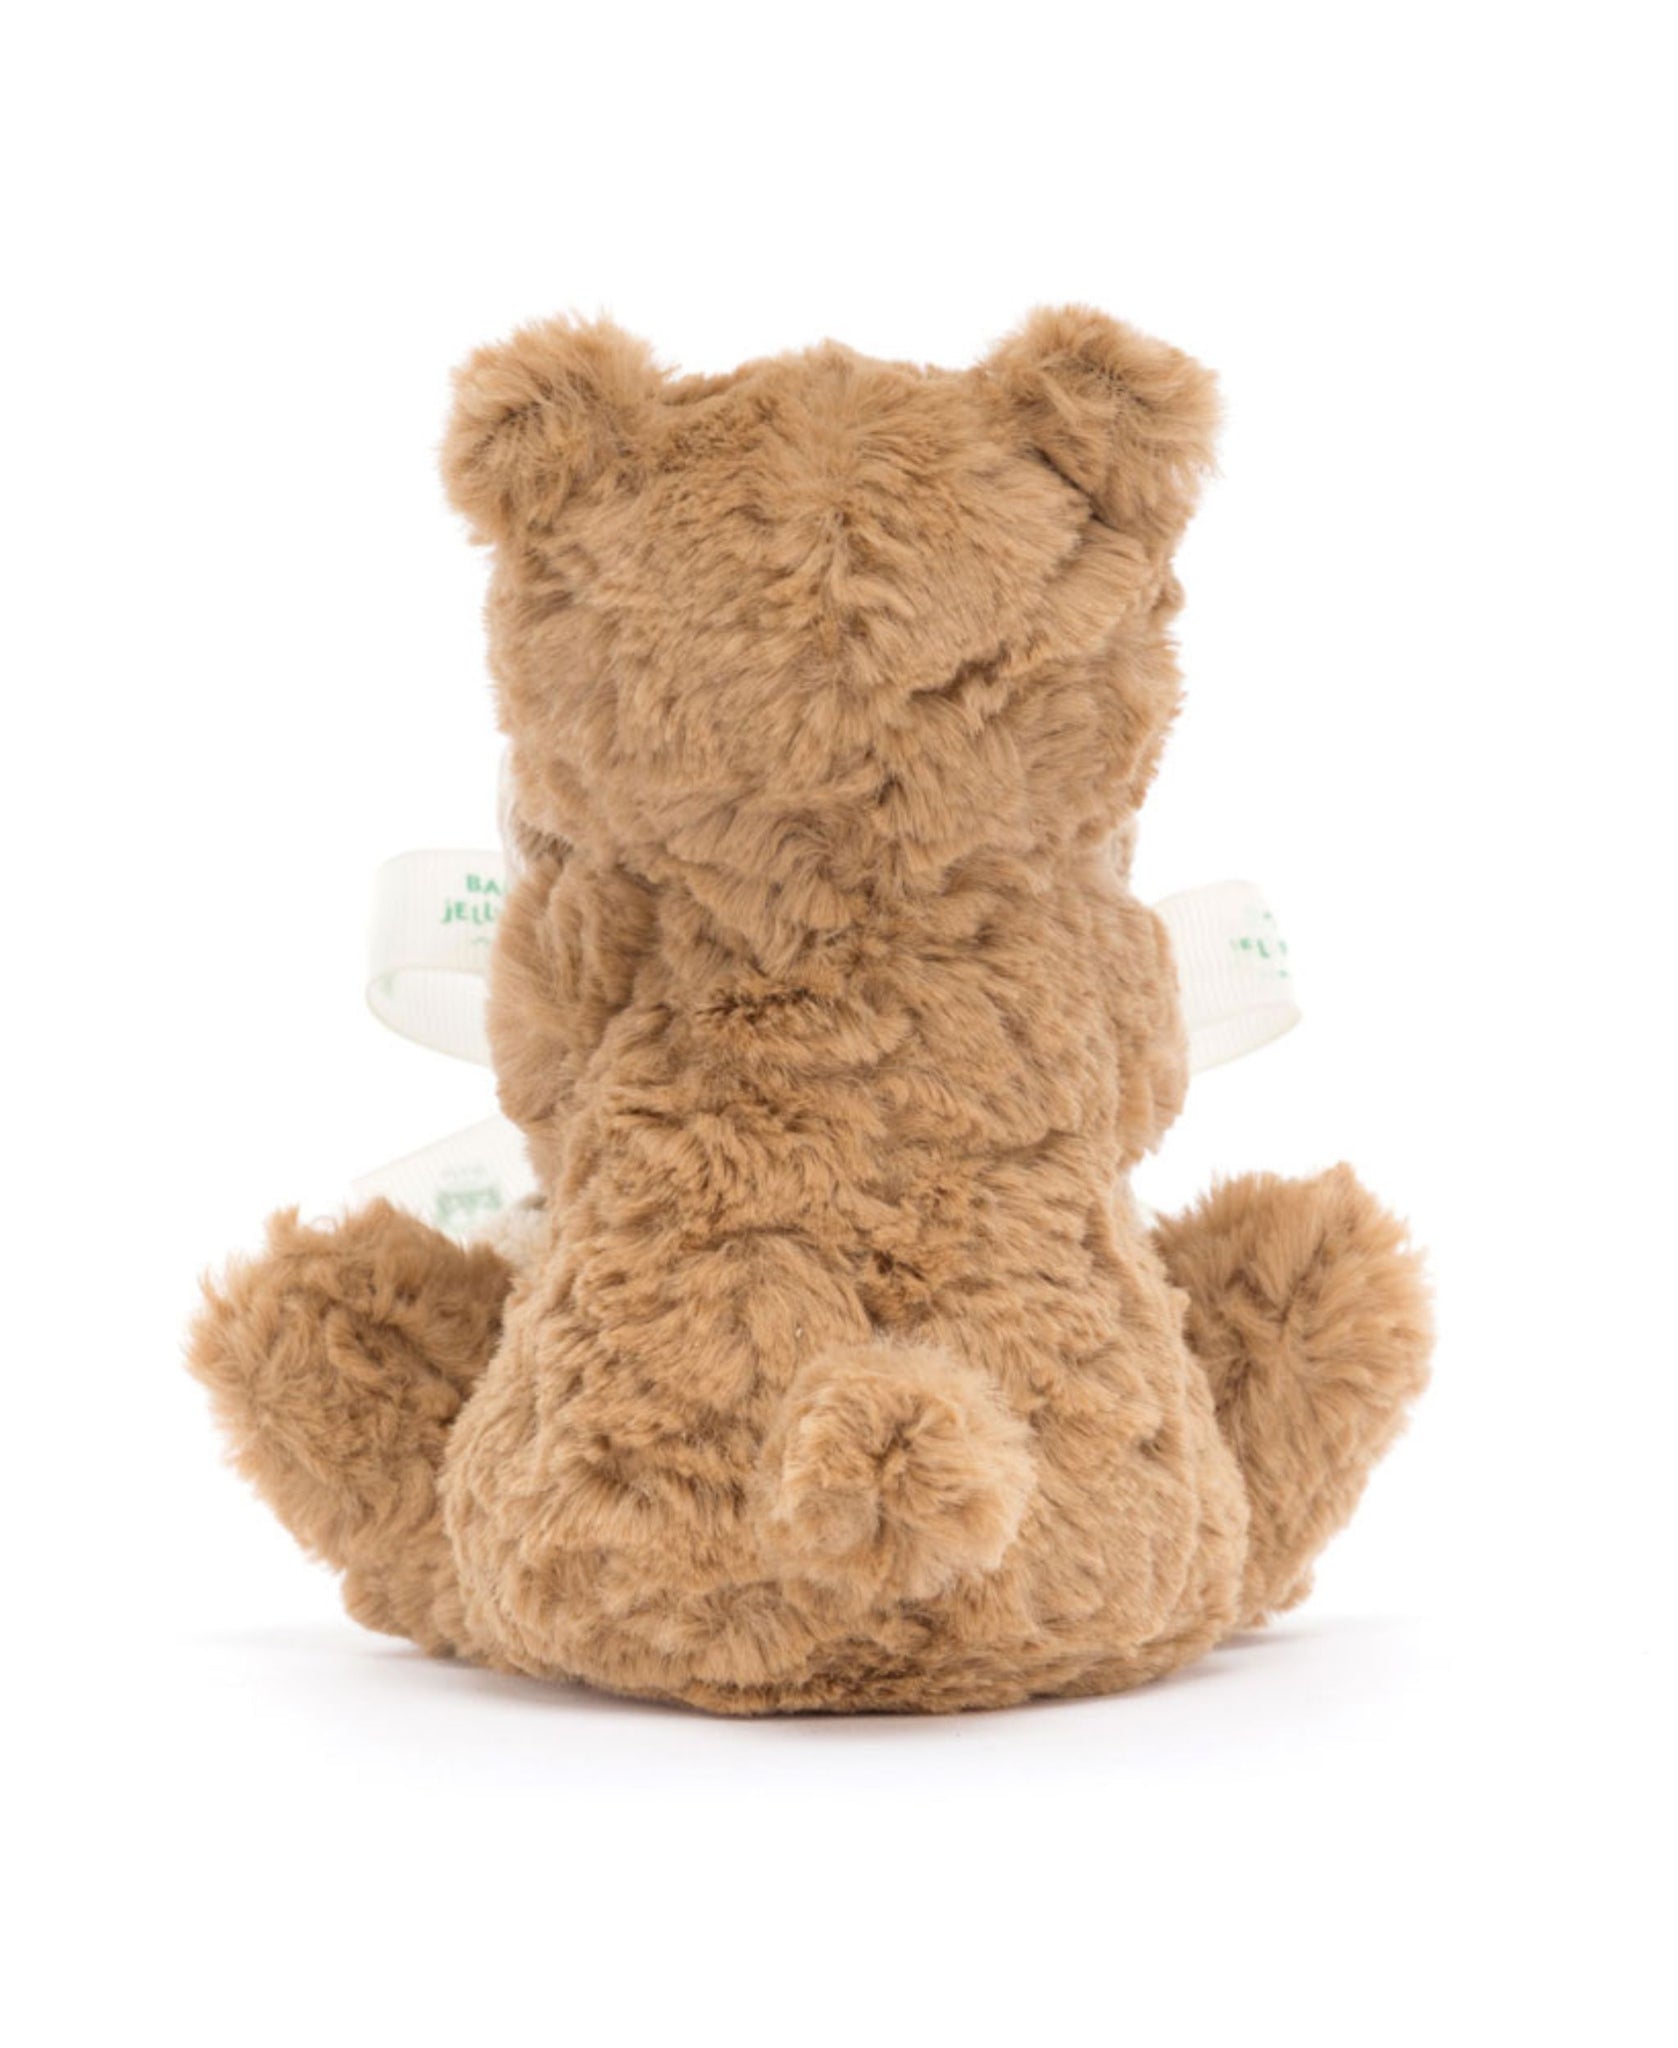 JellyCat Bartholomew Bear Soother